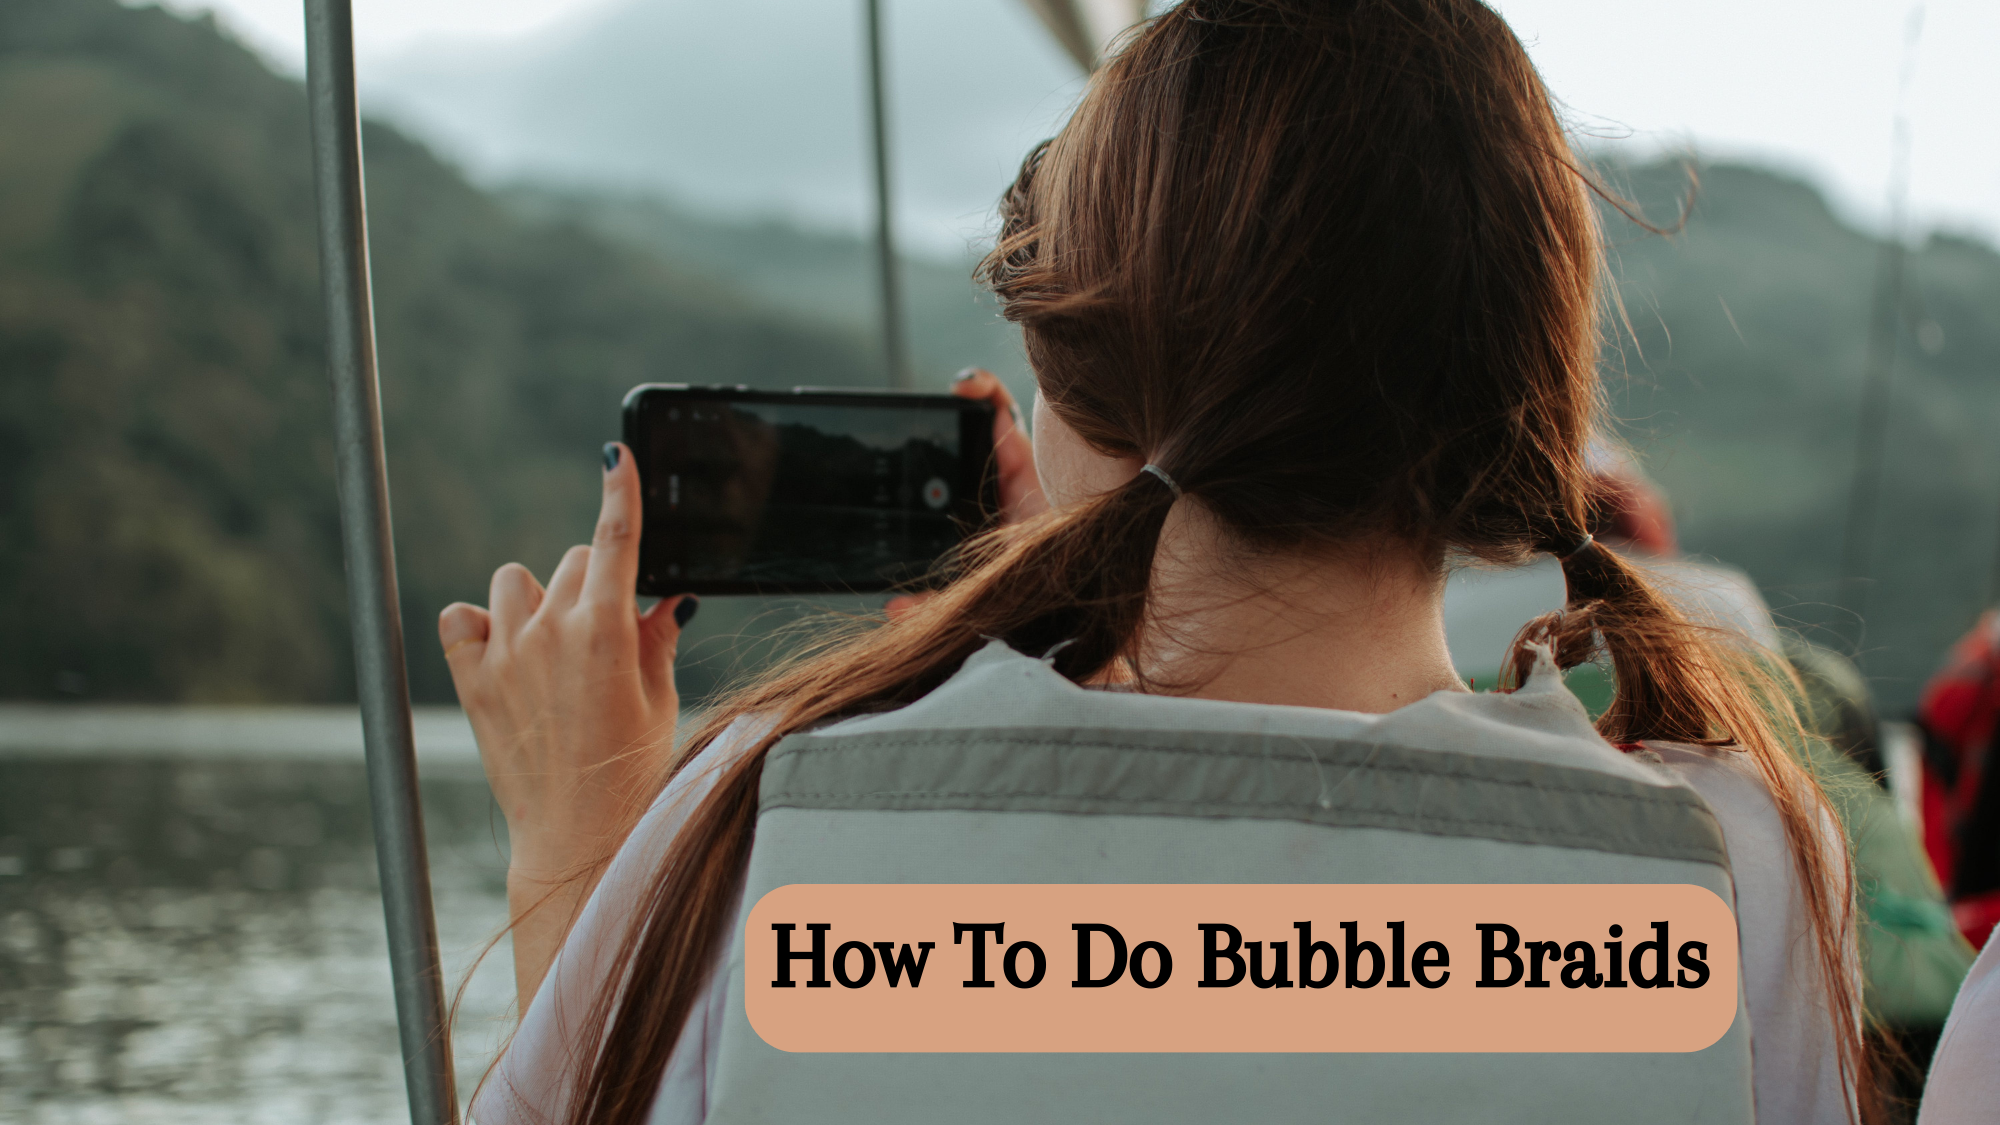 How To Do Bubble Braids